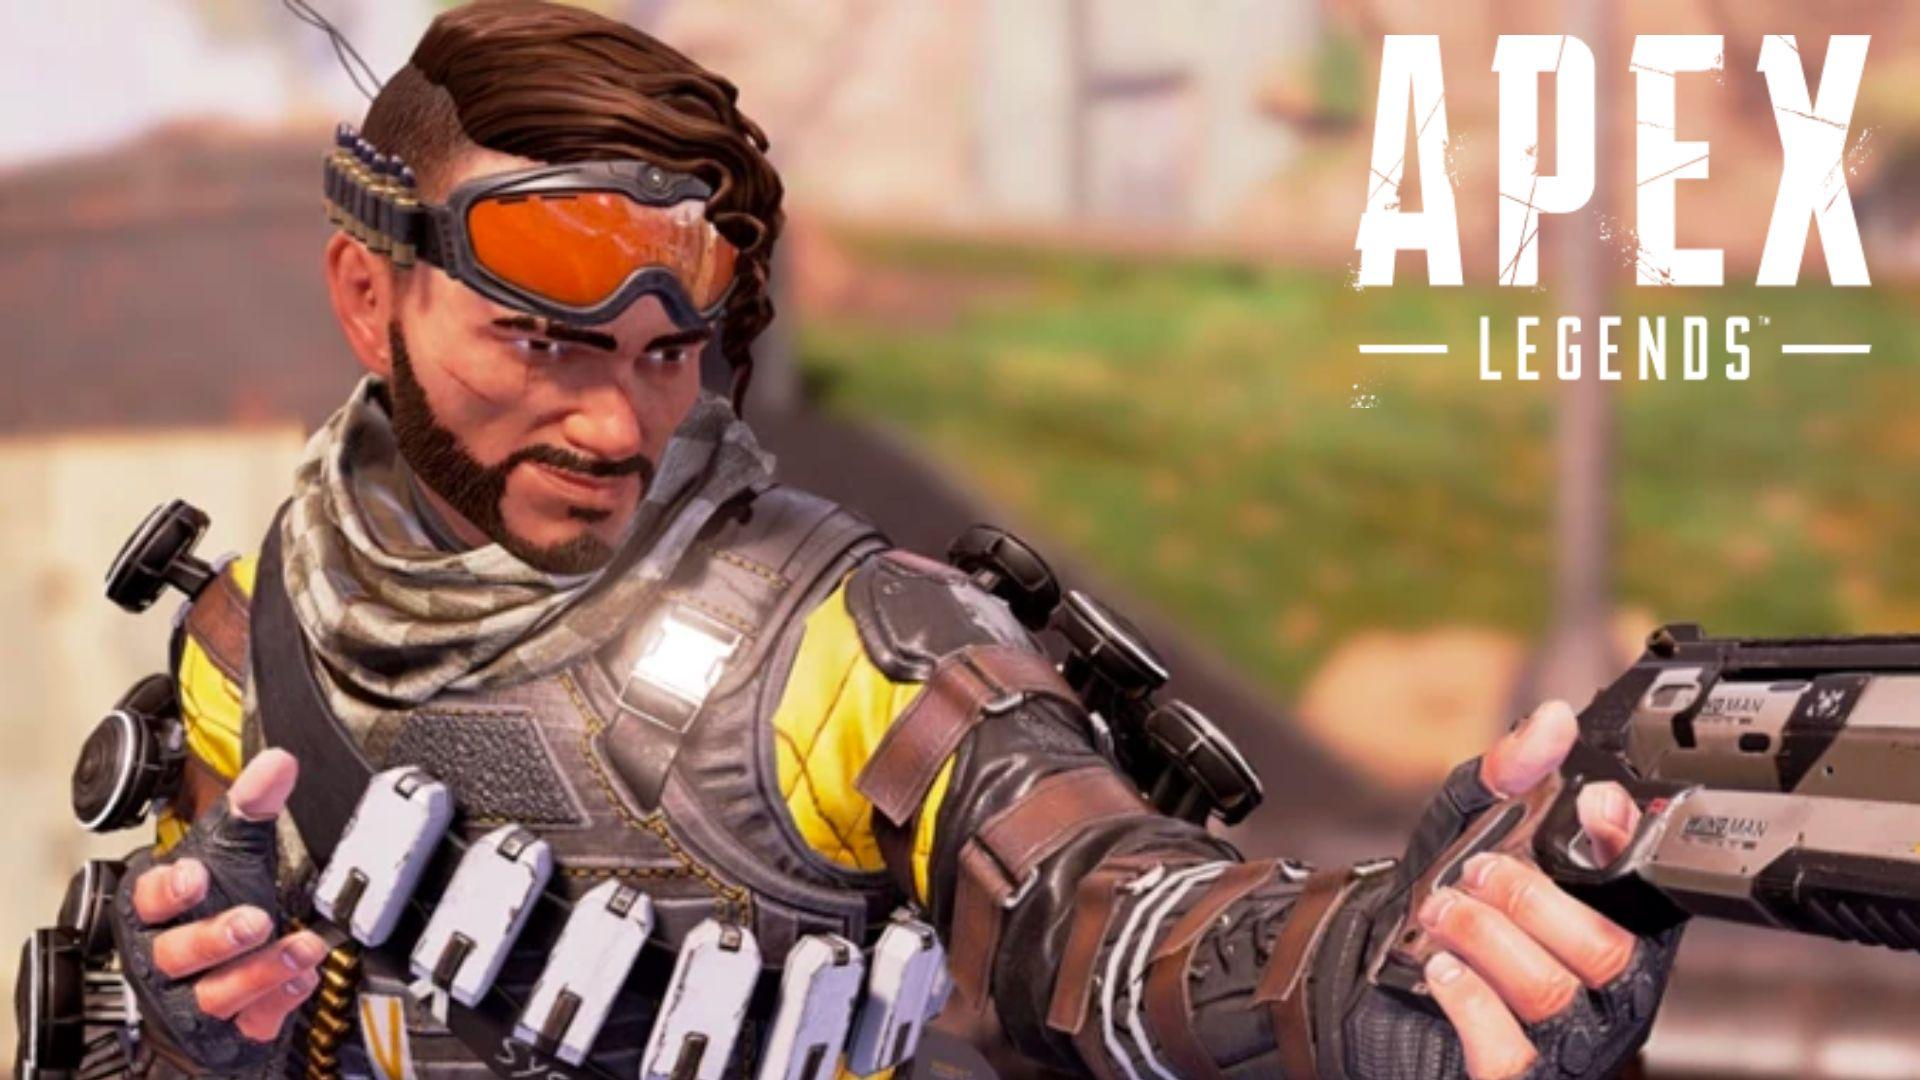 From Game of the Year to getting shut down - why has Apex Legends